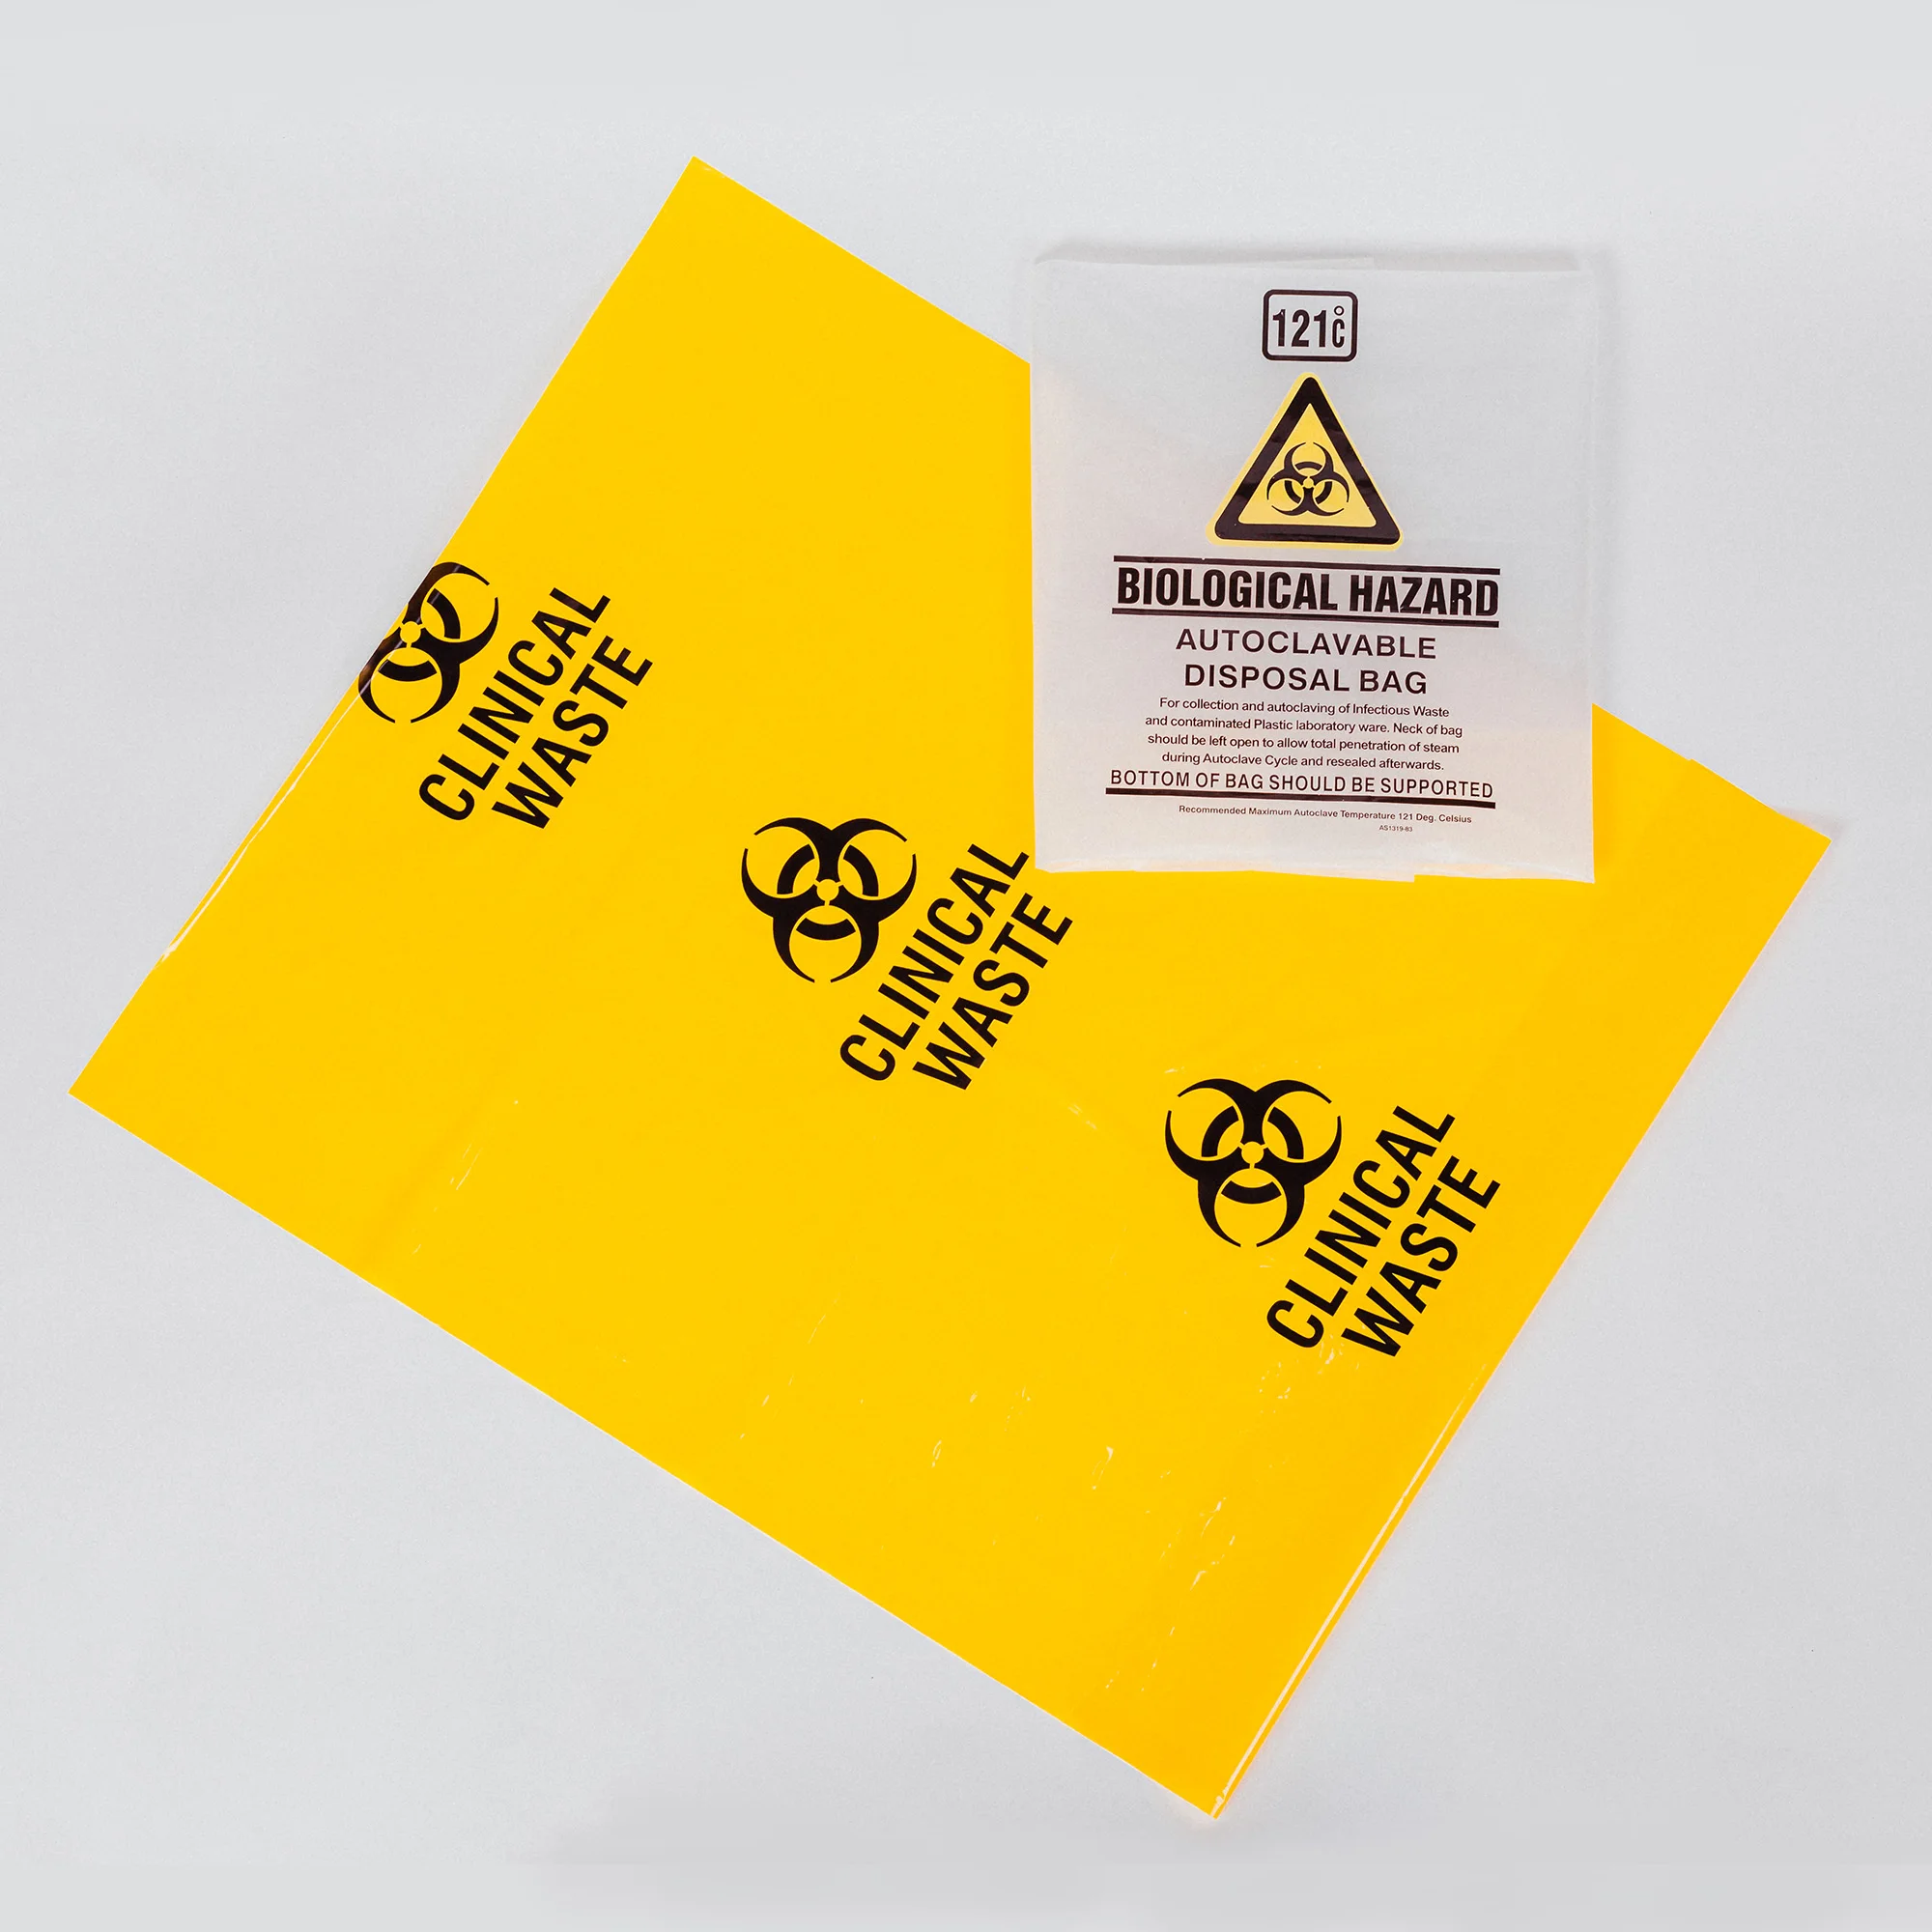 Wholesale Large Plastic Biohazard Drawstring Garbage Bags For Hospital  Suppliers,manufacturers,factories - Chnpack.com